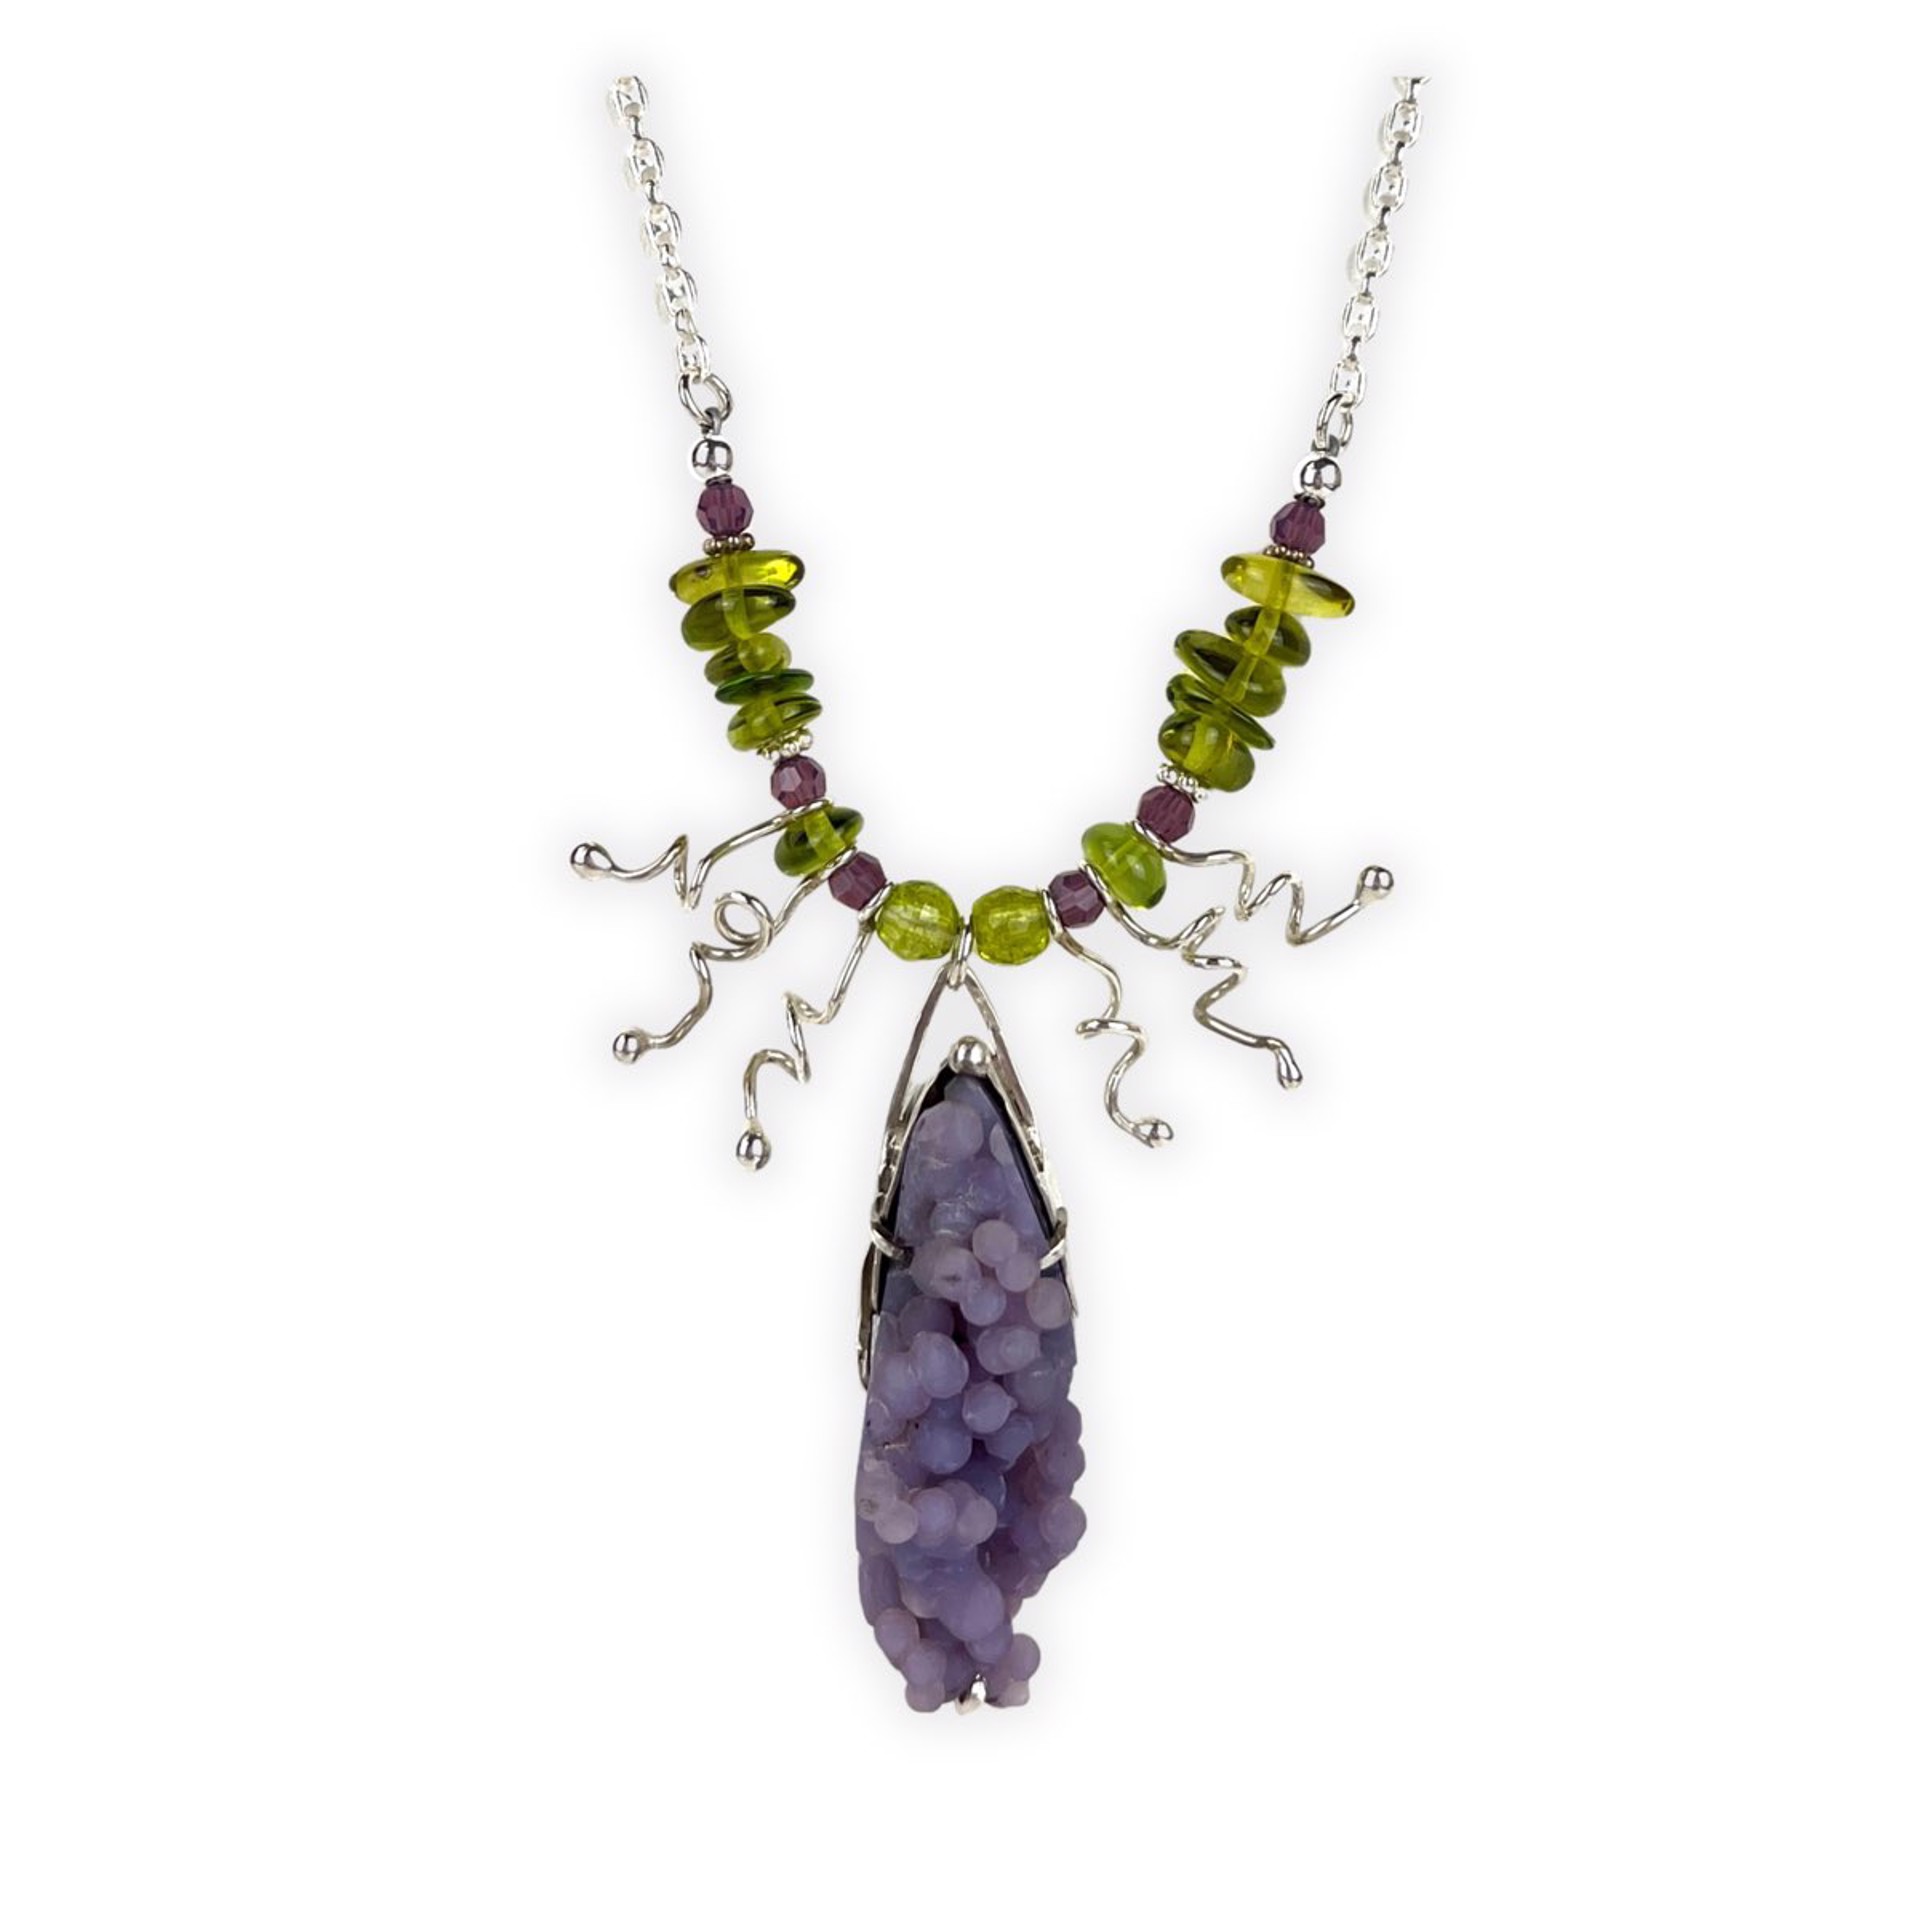 Grape Agate, Peridot, Caribbean Green Amber and Sterling Silver Necklace by Nola Smodic